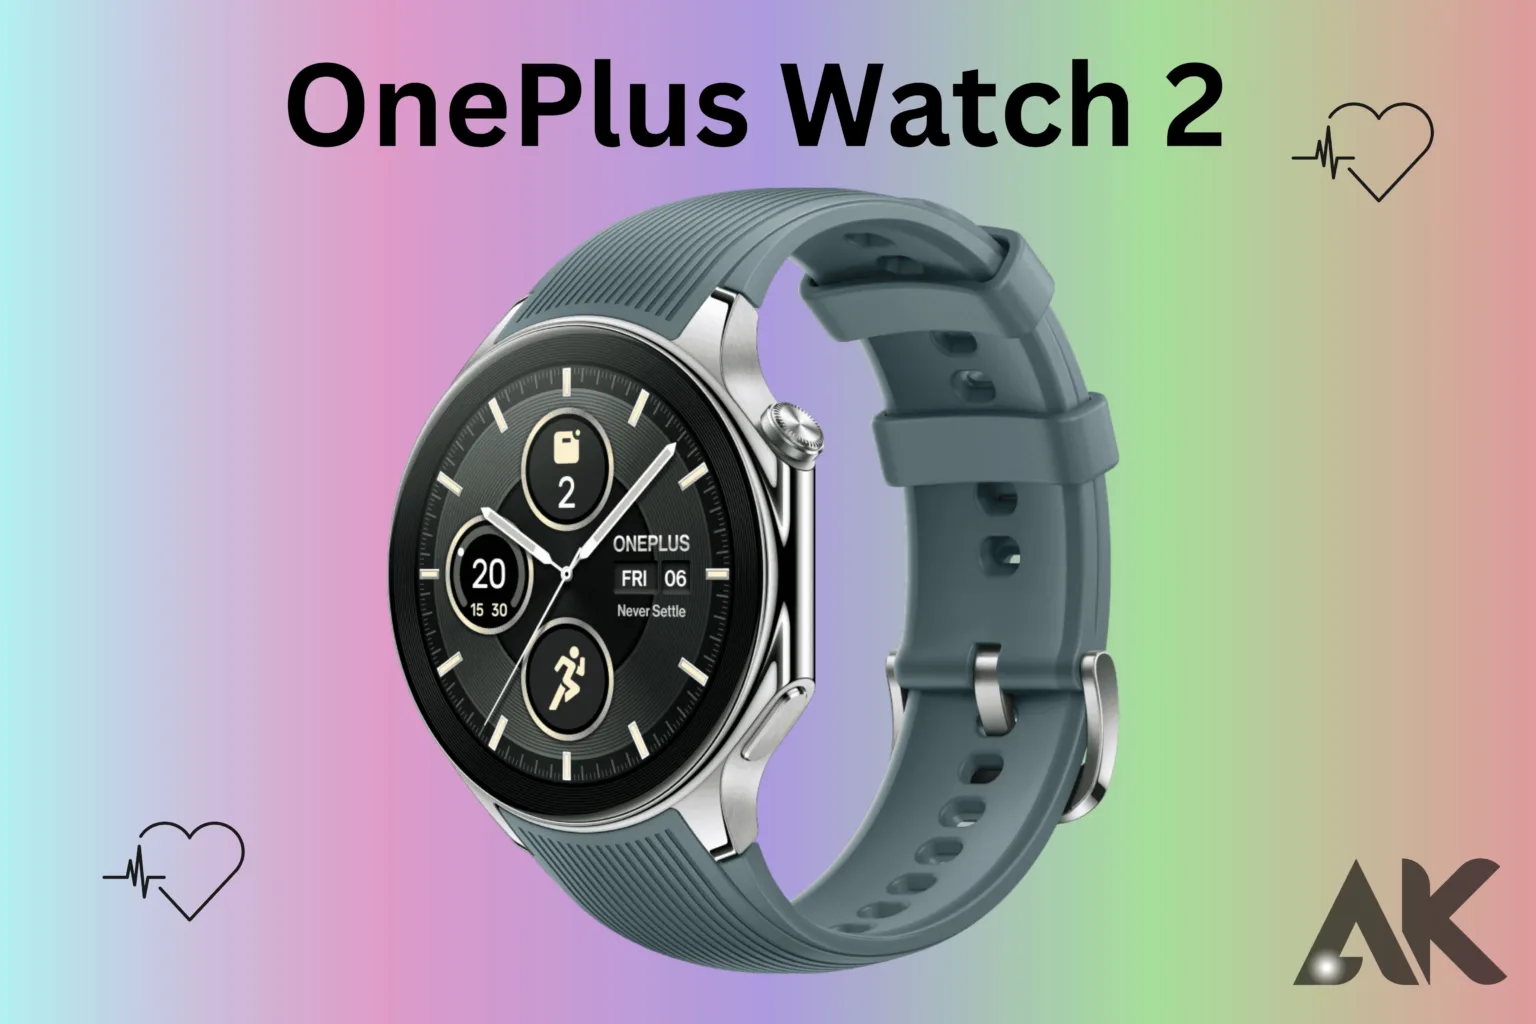 OnePlus Watch 2 user experience